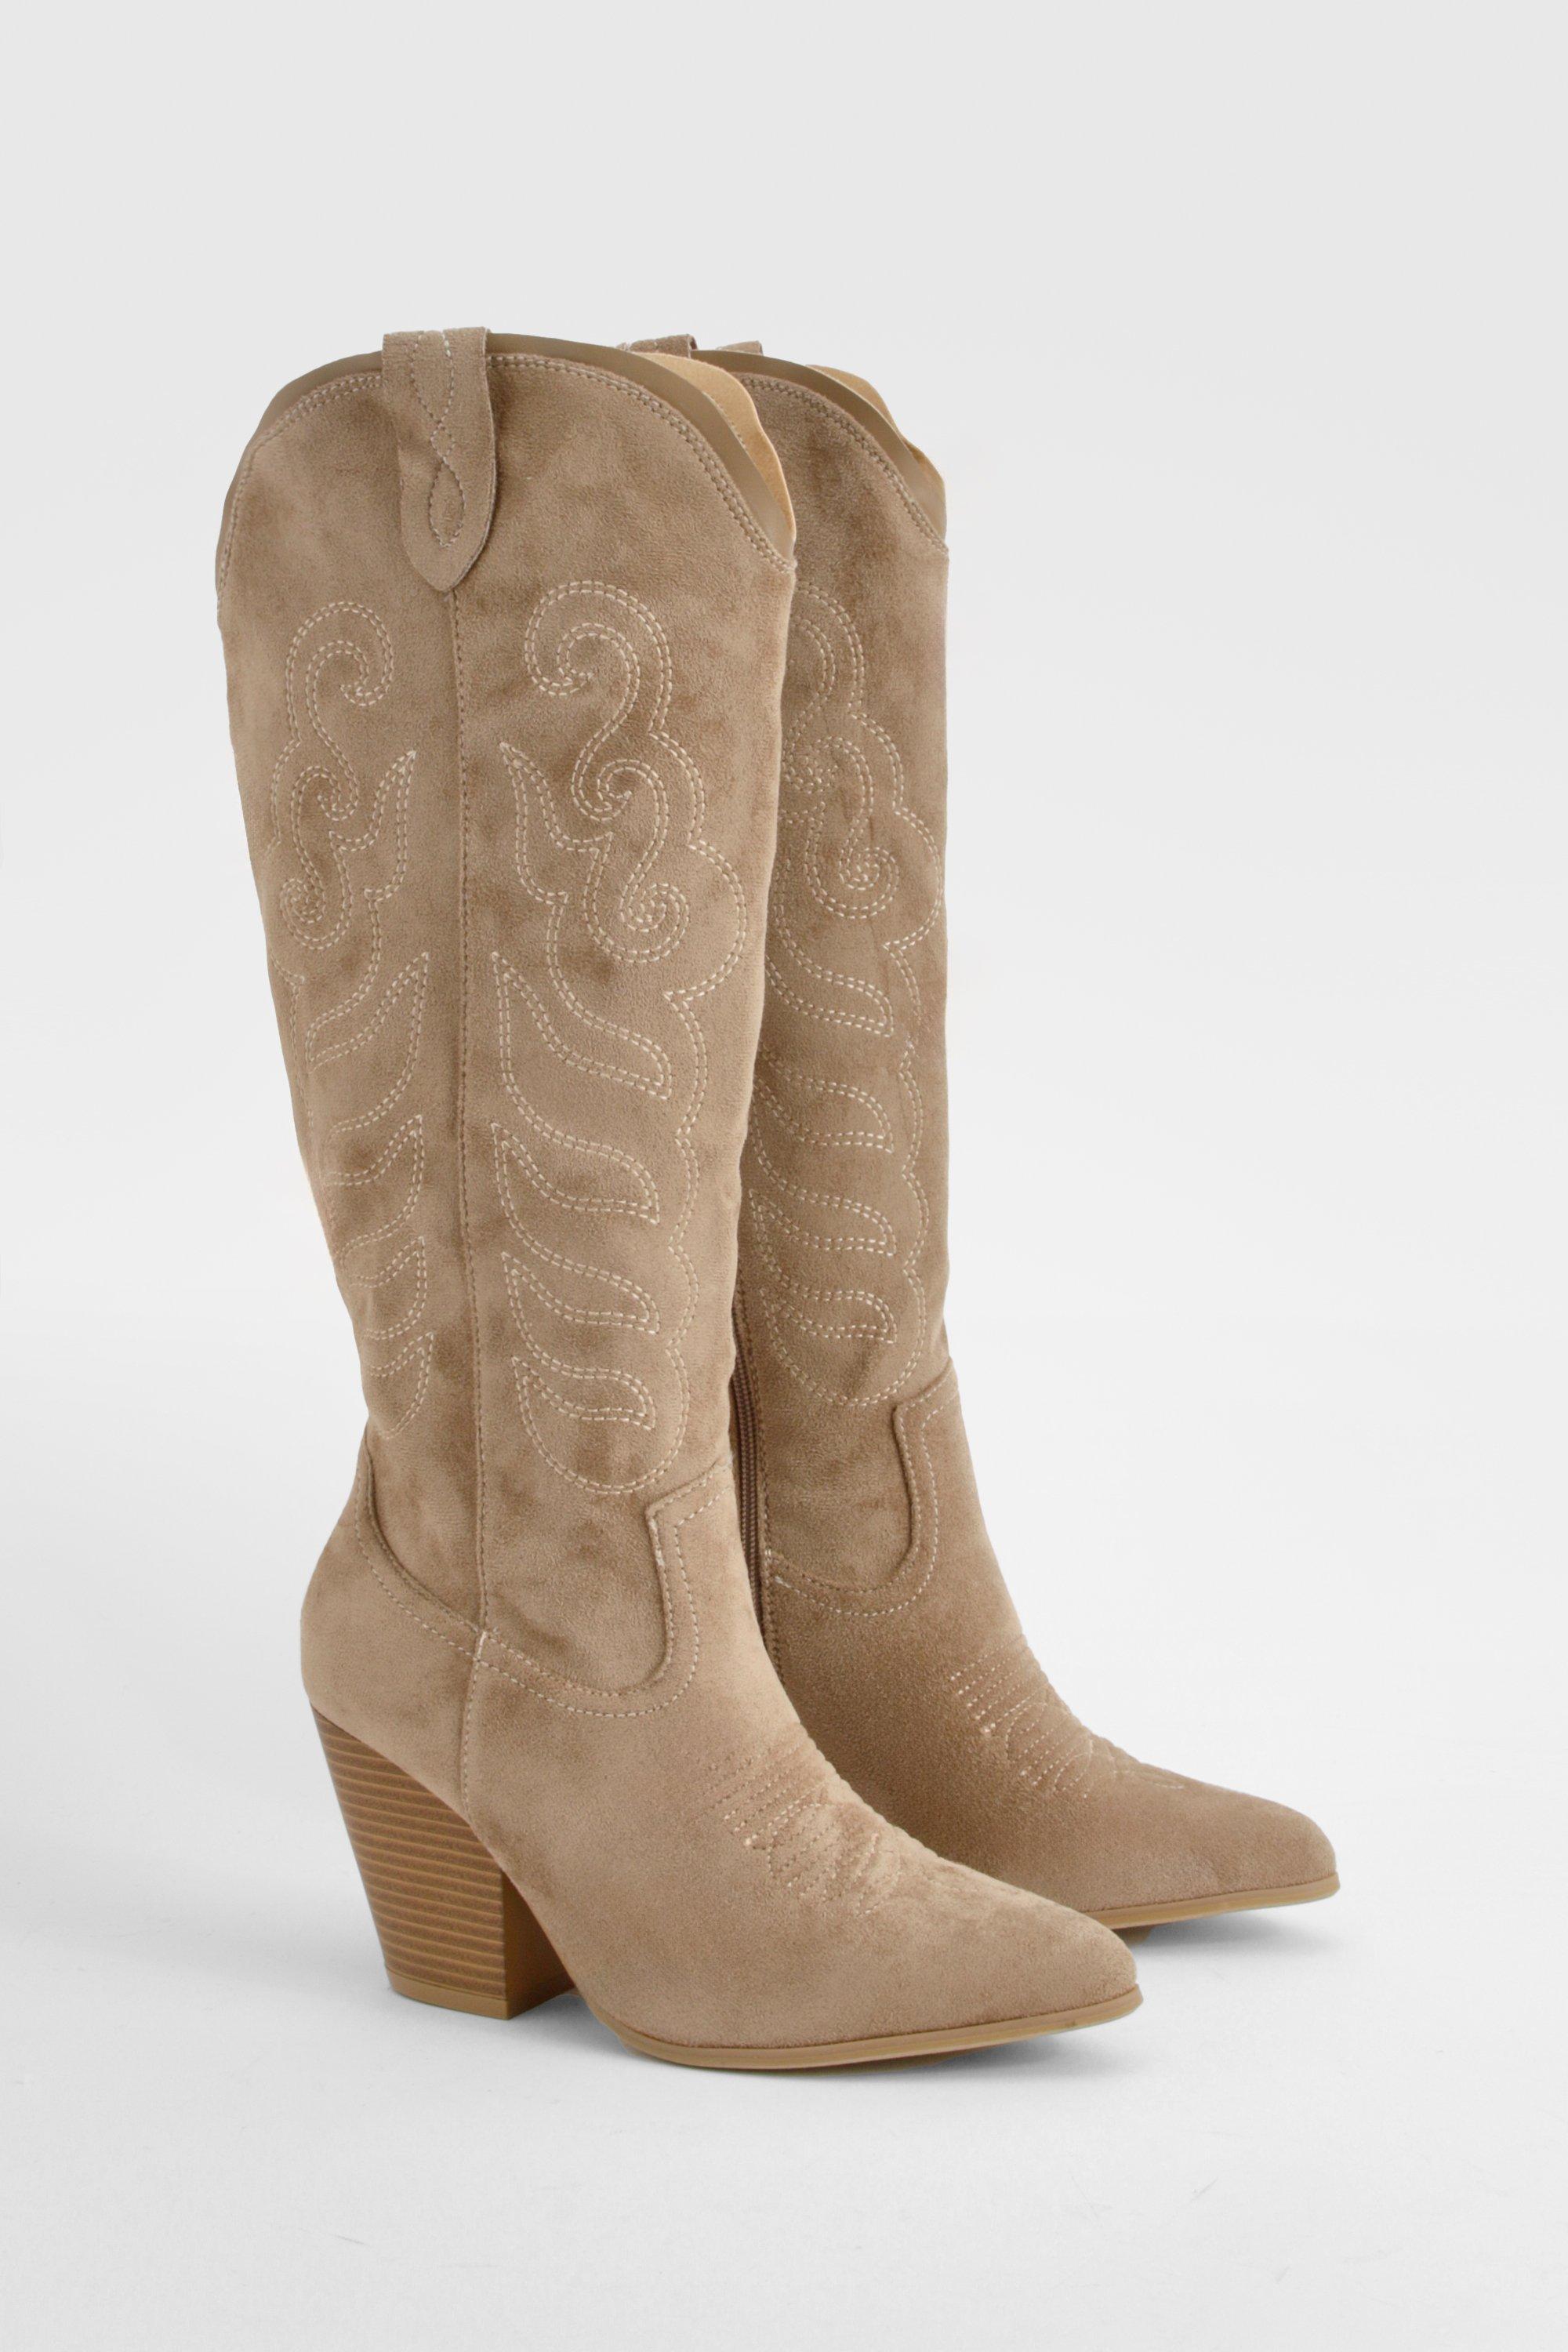 Boohoo Embroidered Knee High Western Cowboy Boots, Taupe